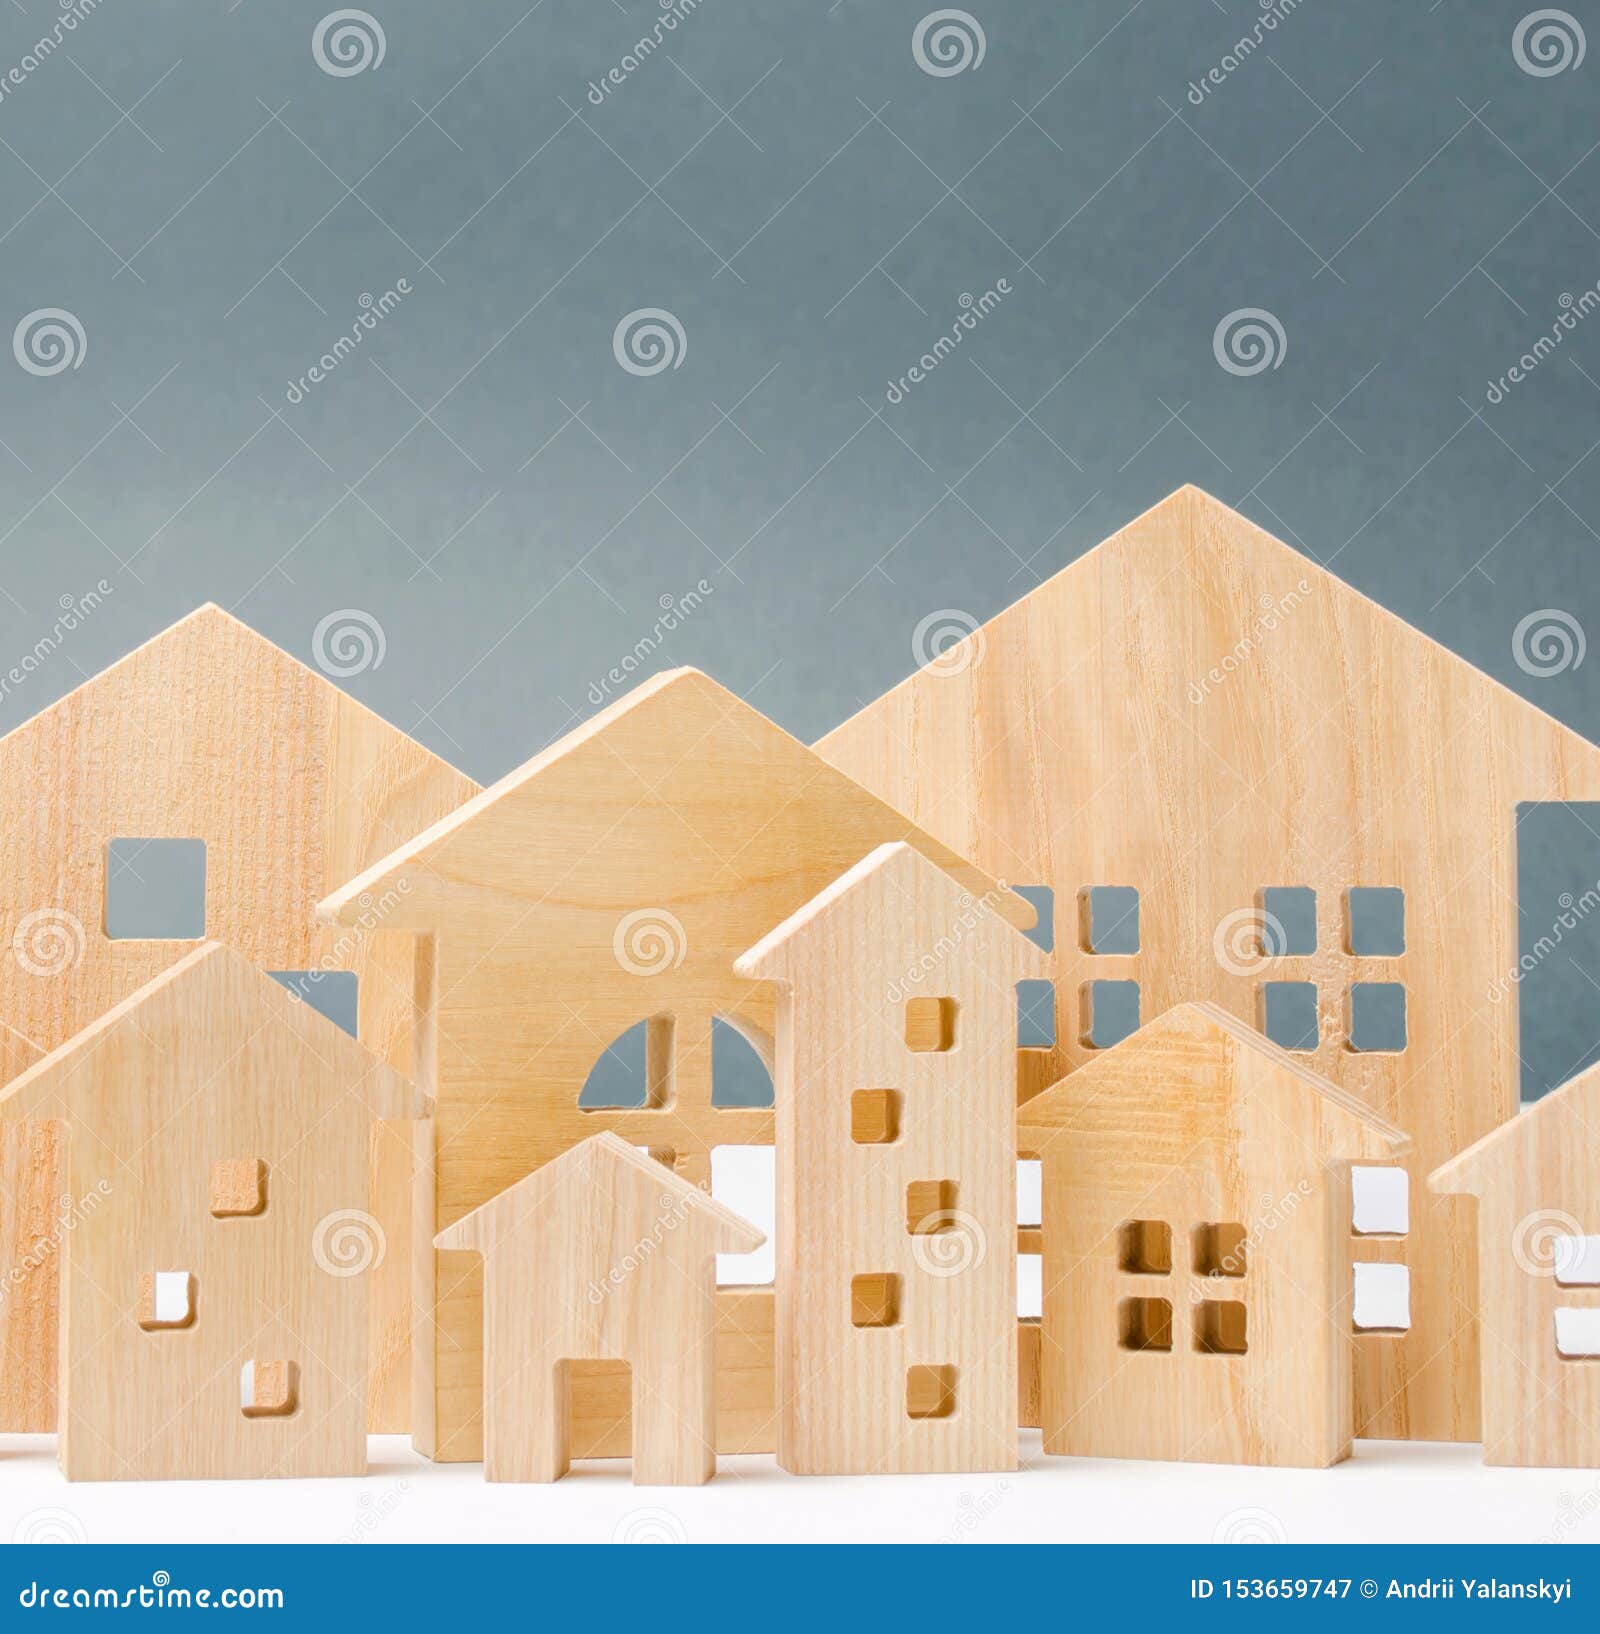 miniature wooden houses. real estate. city. agglomeration and urbanization. real estate market analytics. demand for housing.